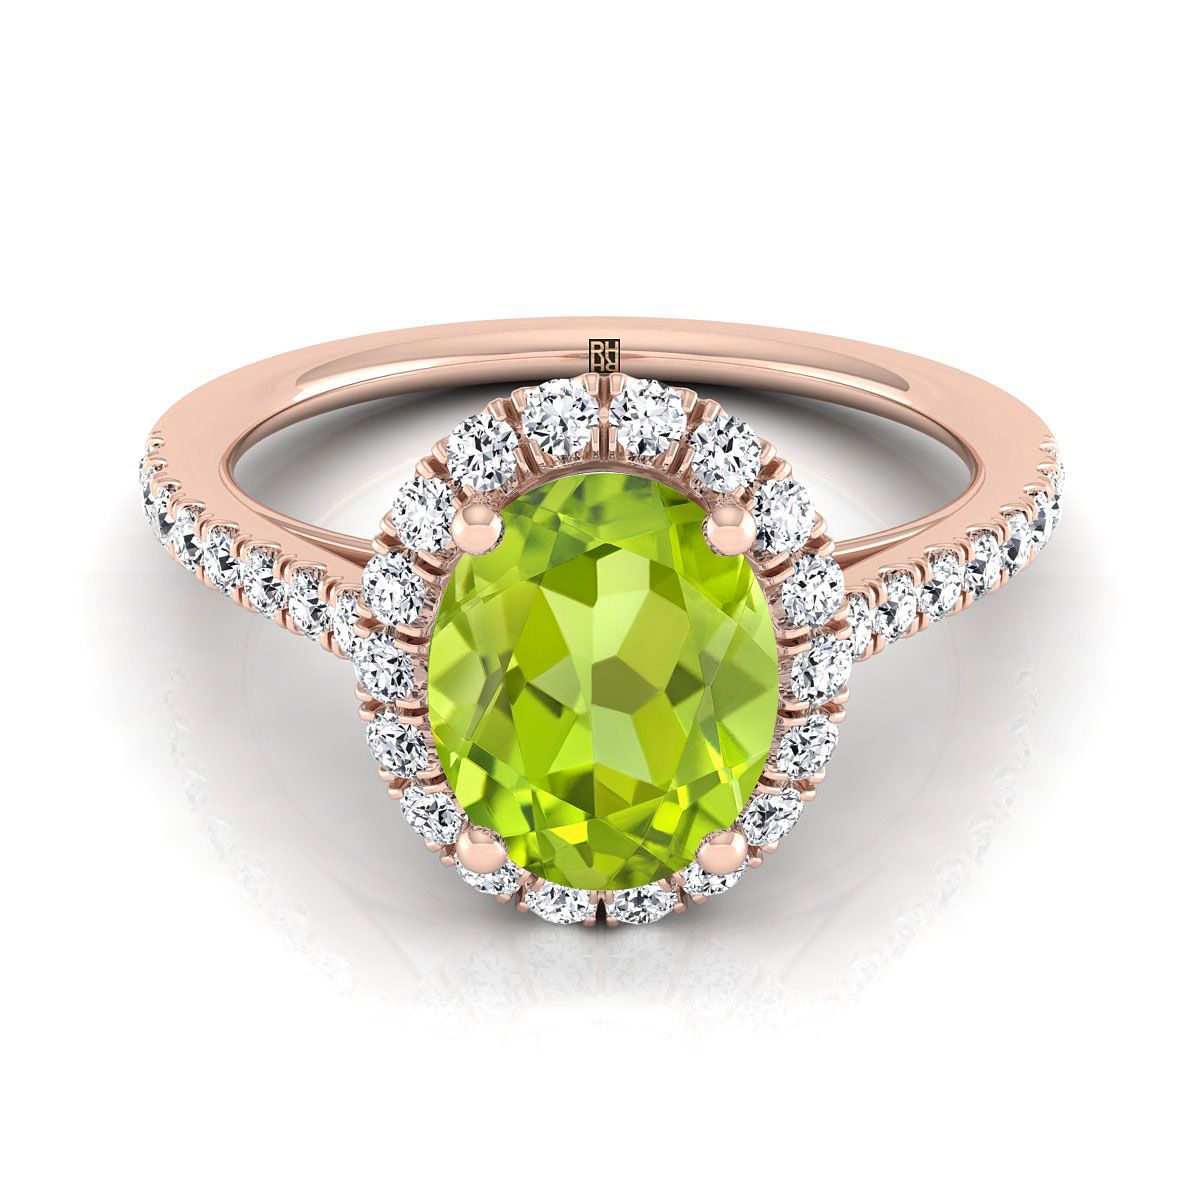 14K Rose Gold Oval Peridot Petite Halo French Diamond Pave Engagement Ring -3/8ctw